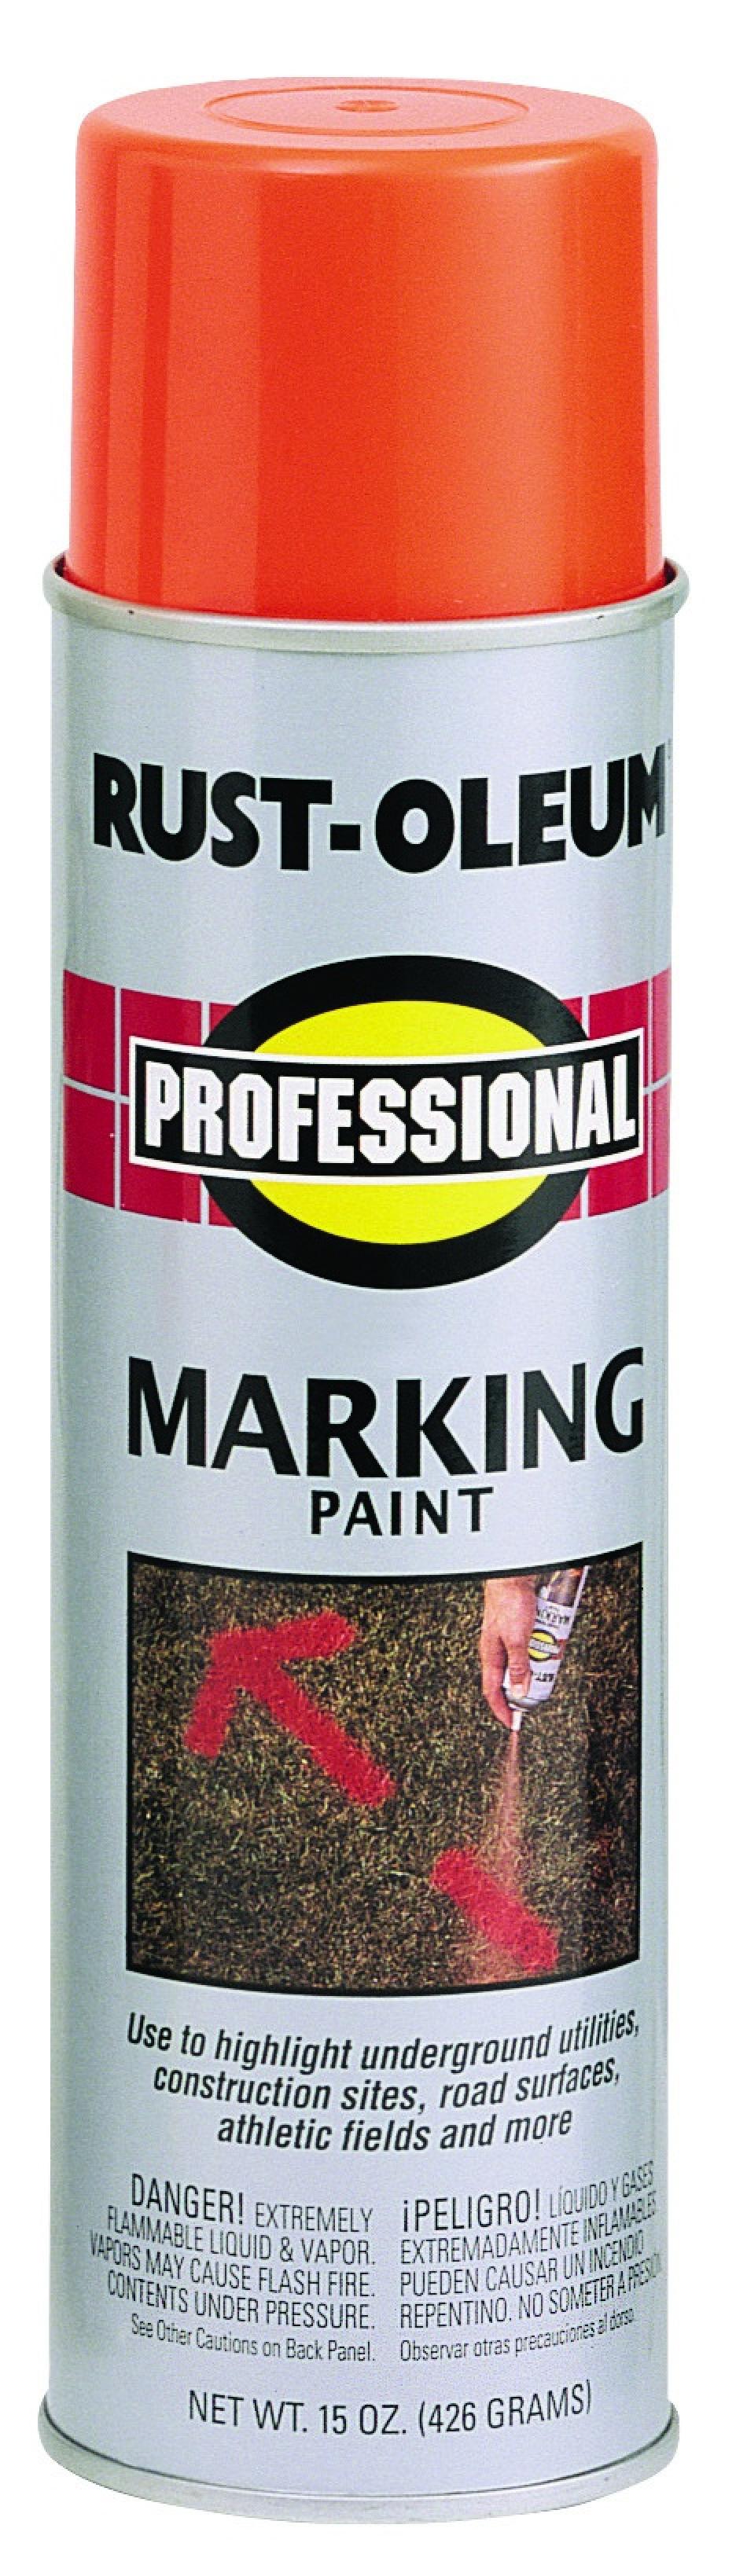 Inverted Marking Paint Spray